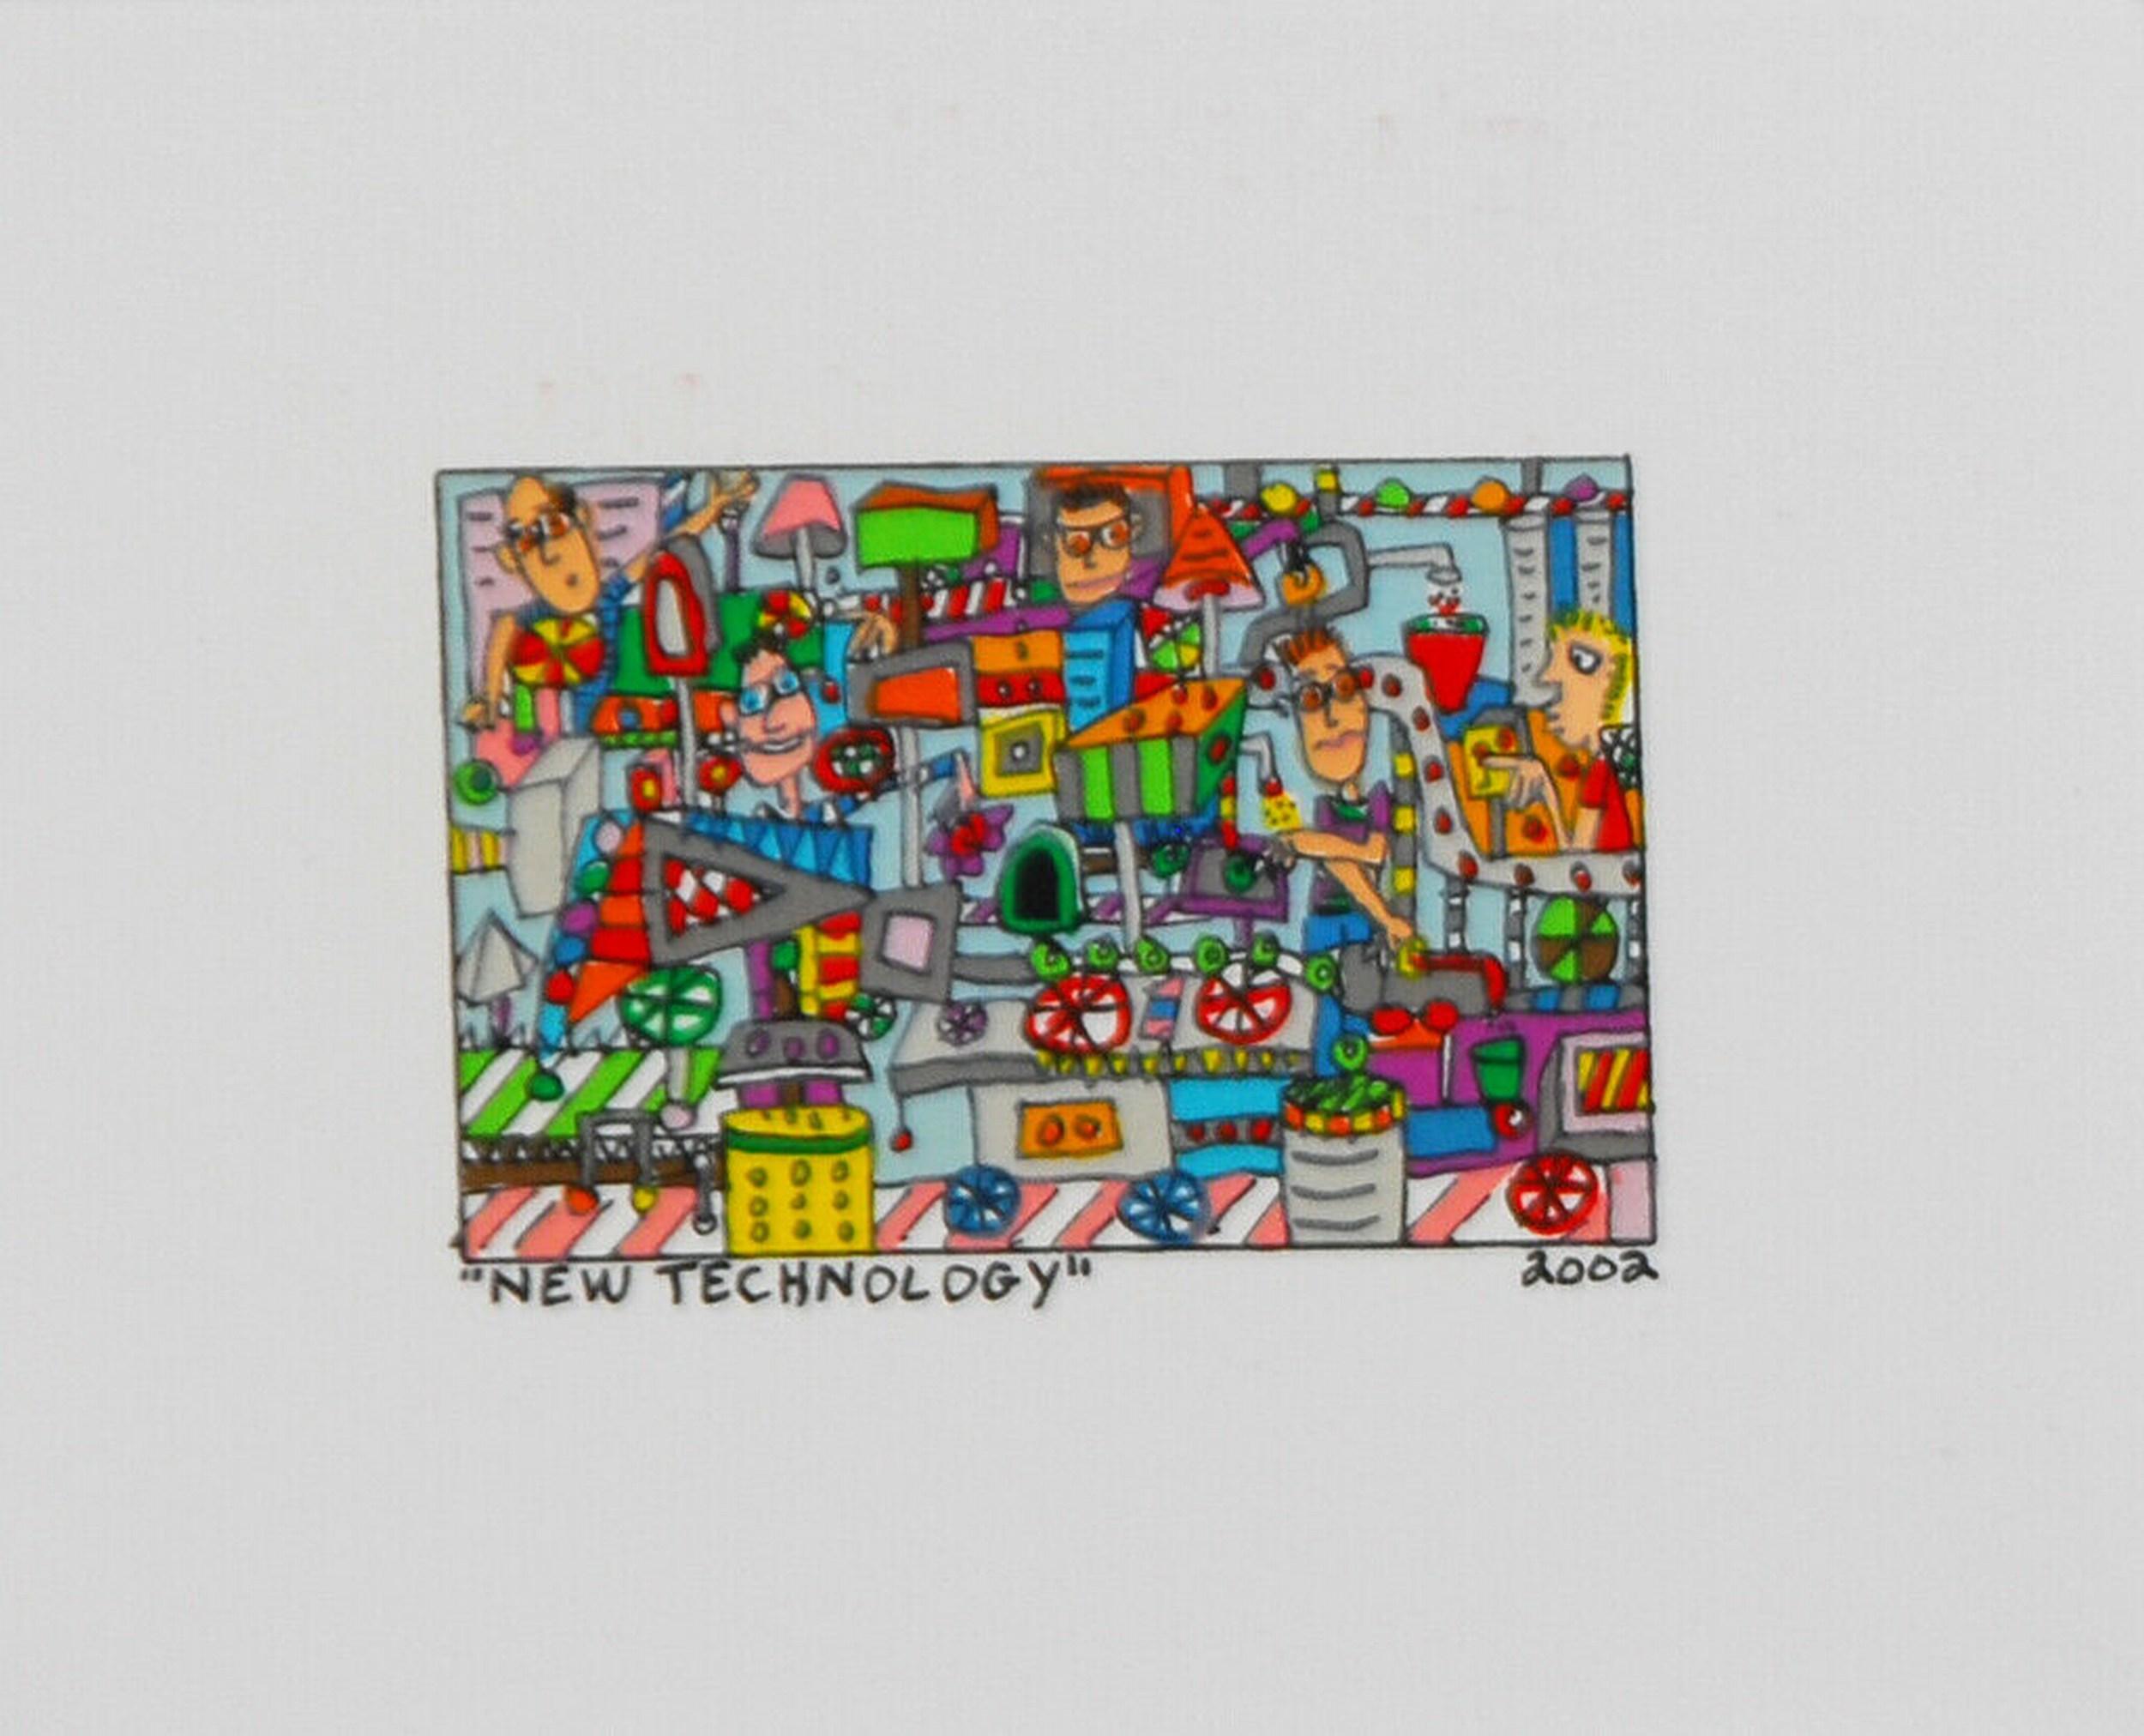 What type of art did James Rizzi do?